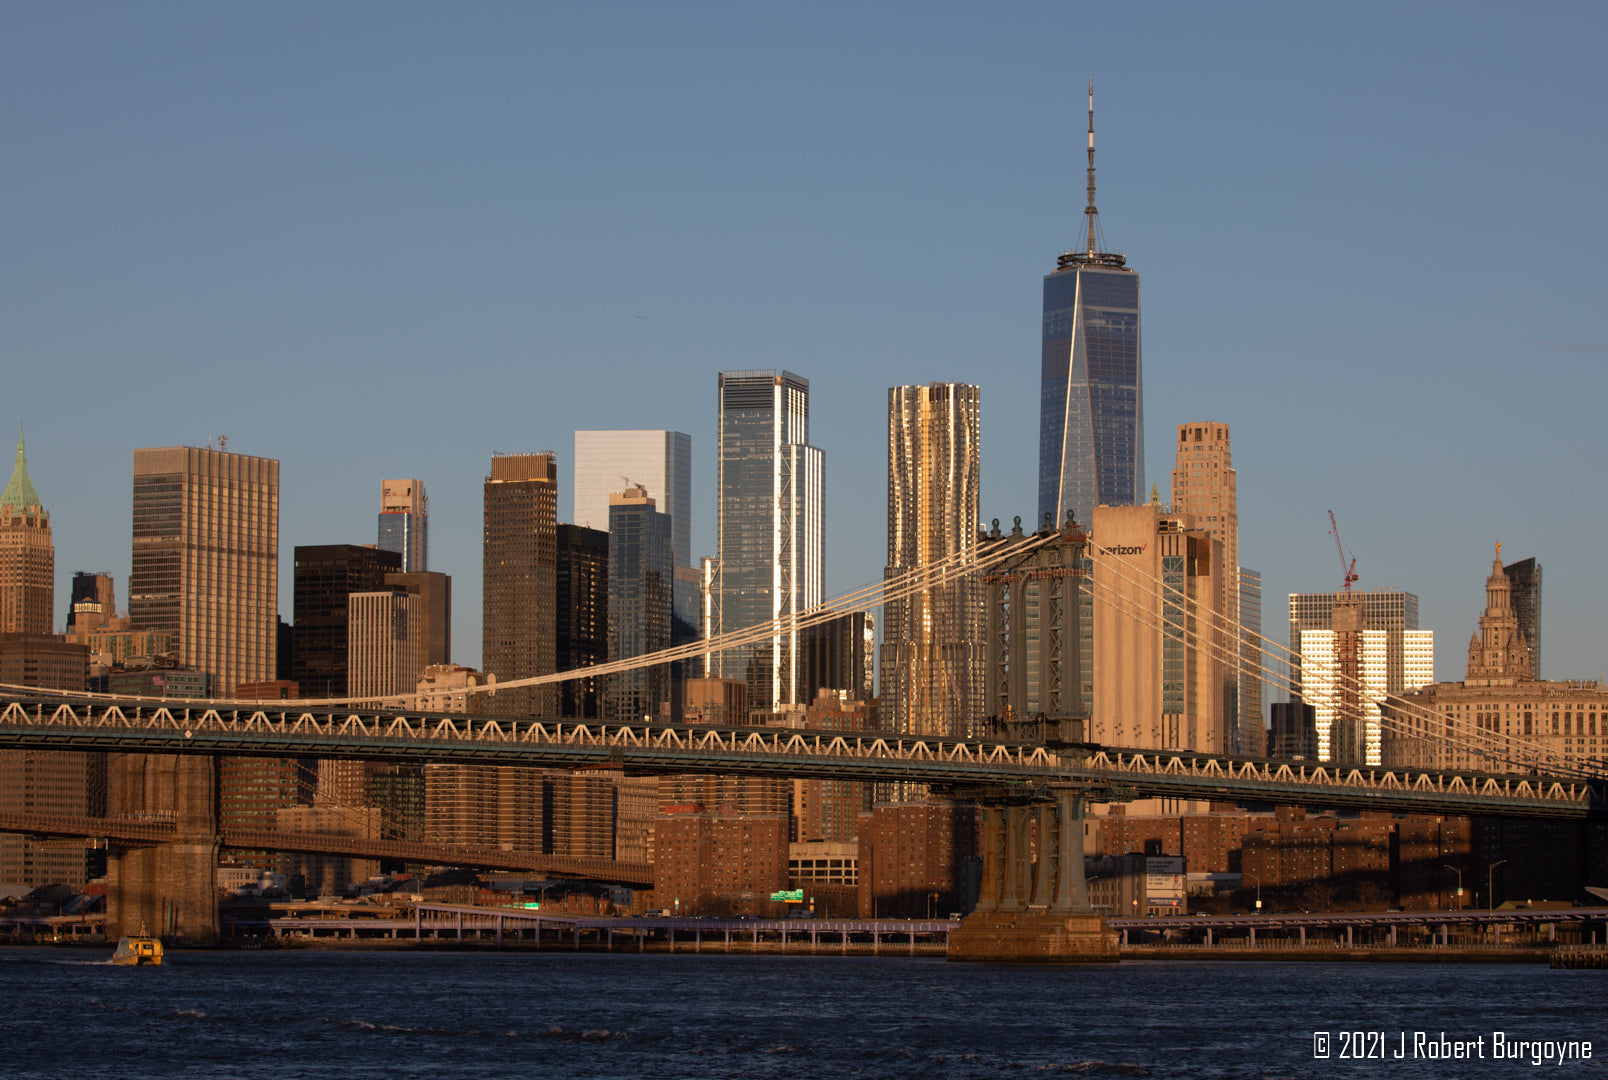 Image of Manhattan Bridge on the East River with skyscrapers in the background